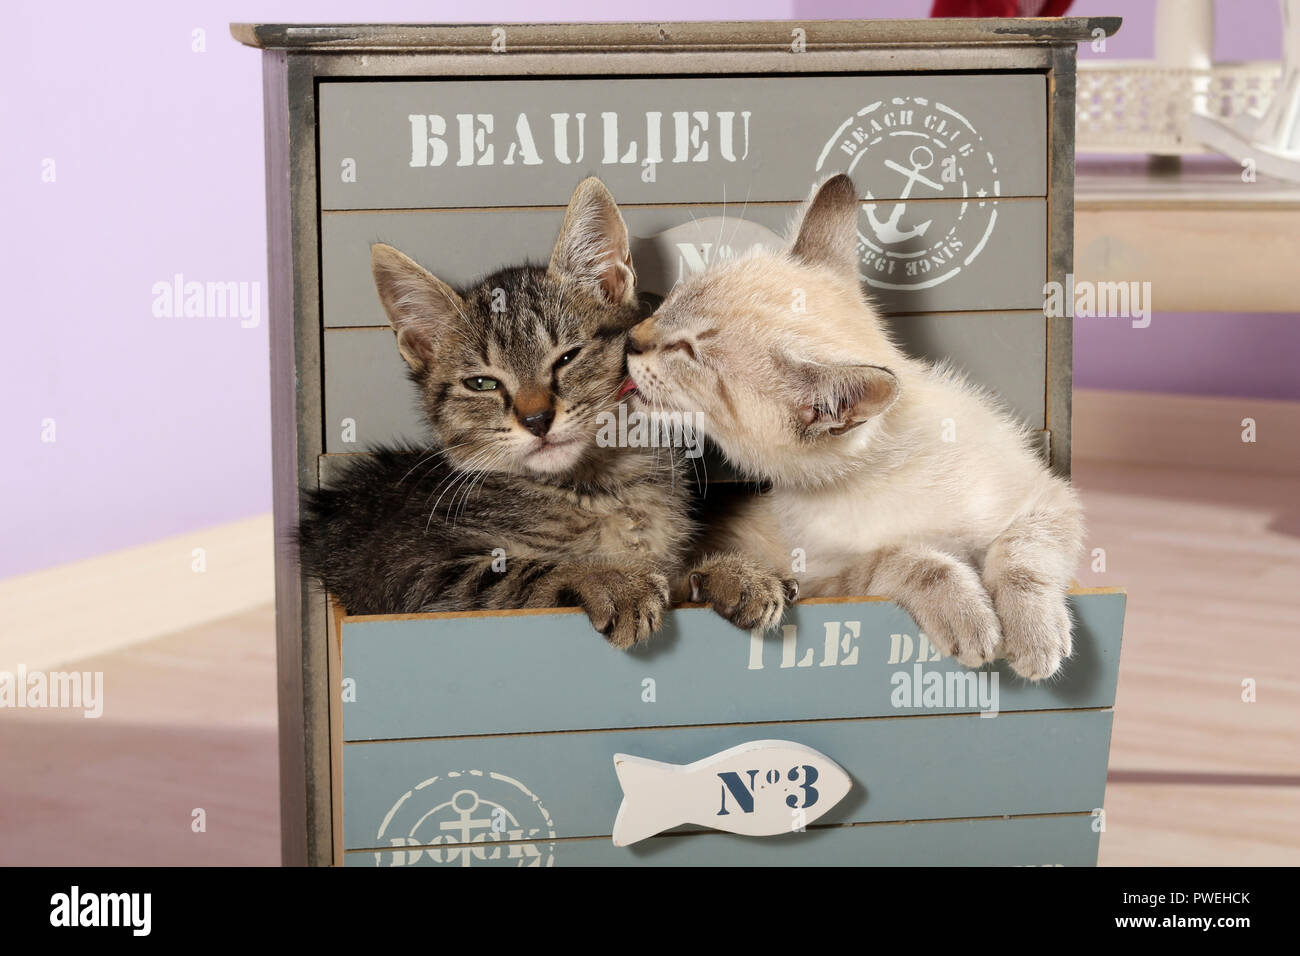 two kittens, seal tabby point and black tabby, cuddling Stock Photo